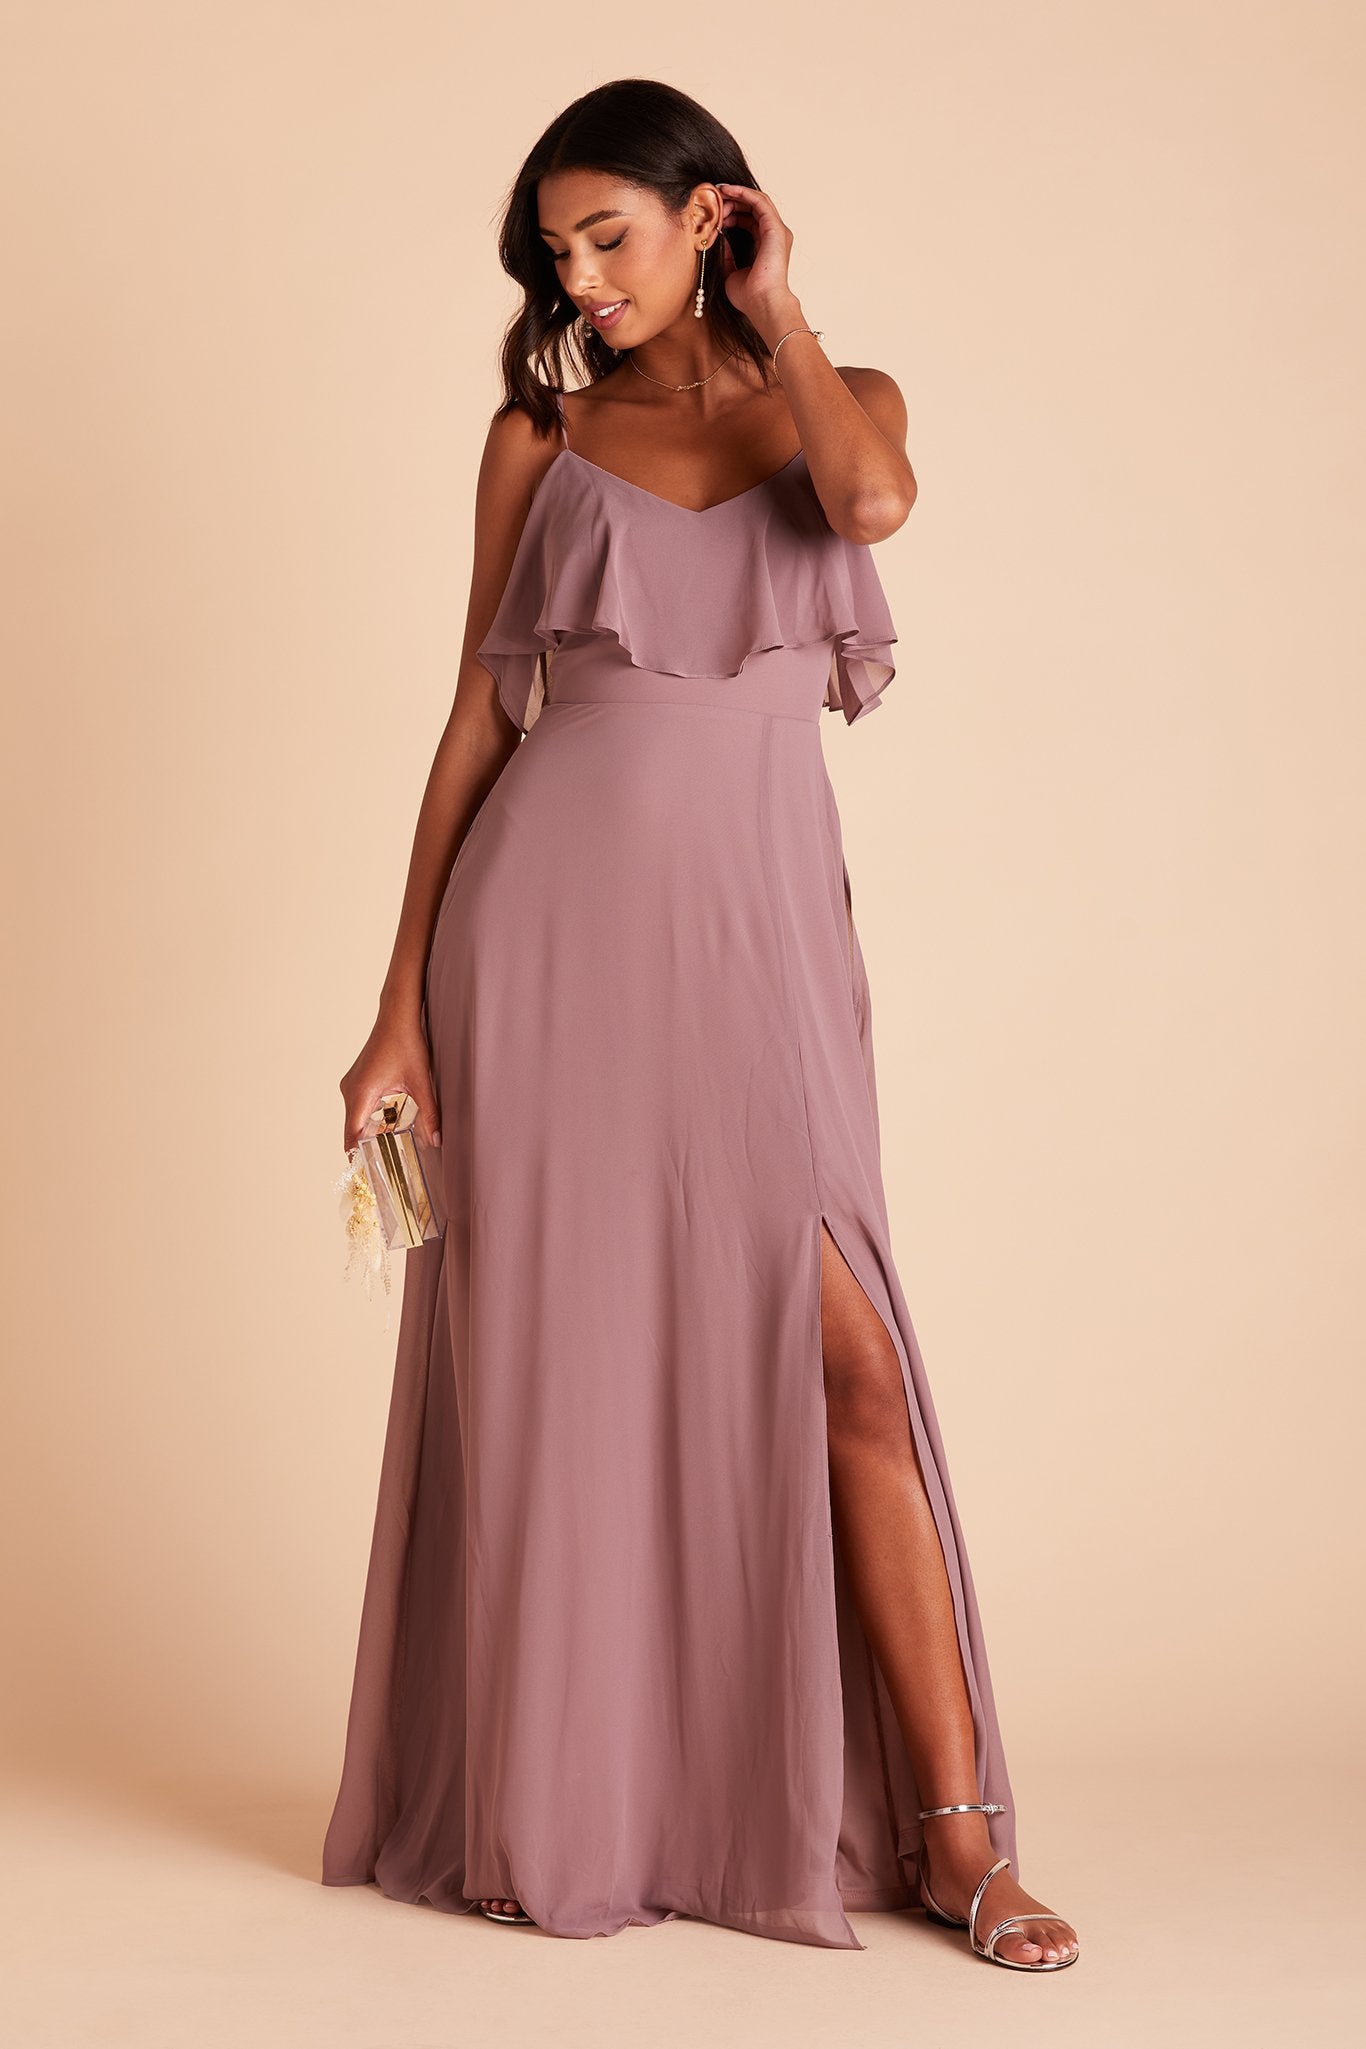 Jane convertible bridesmaid dress with slit in dark mauve chiffon by Birdy Grey, front view